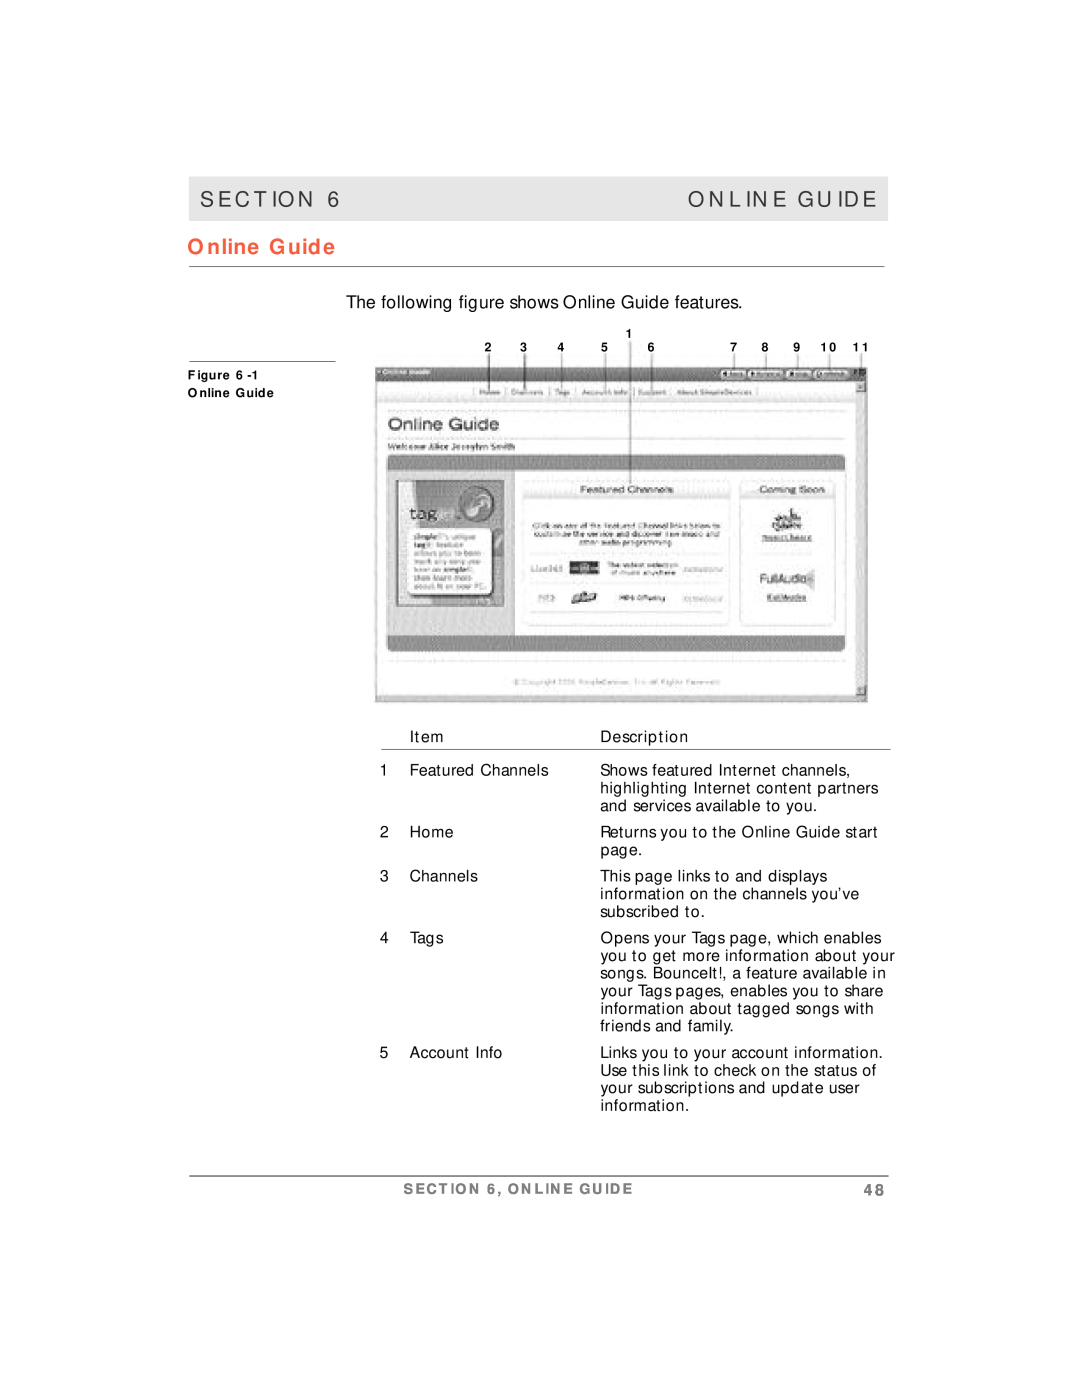 Motorola simplefi manual Section, The following figure shows Online Guide features 